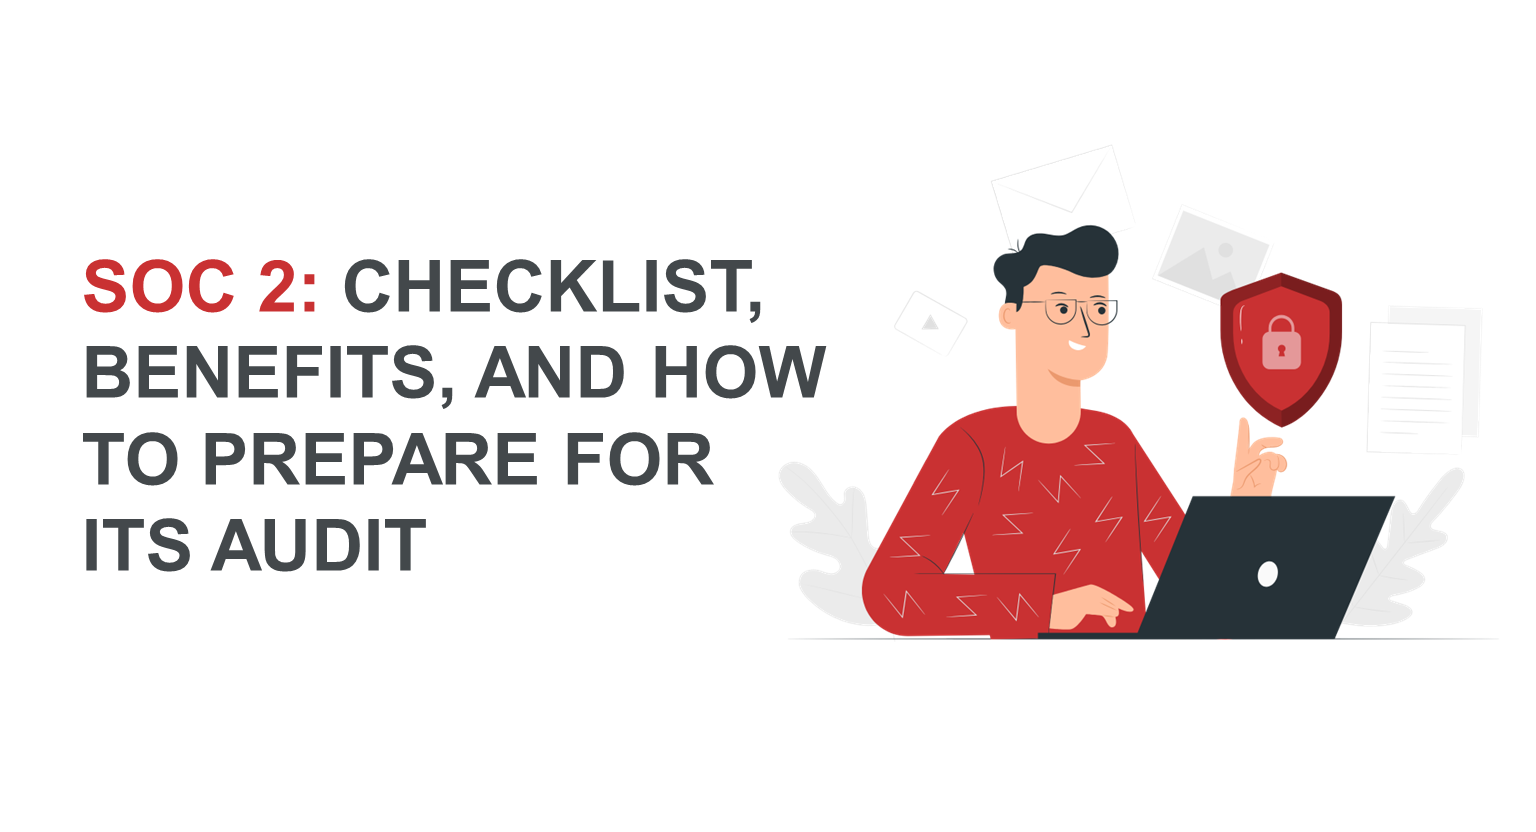 SOC 2: Checklist, Benefits, and How to prepare for its Audit